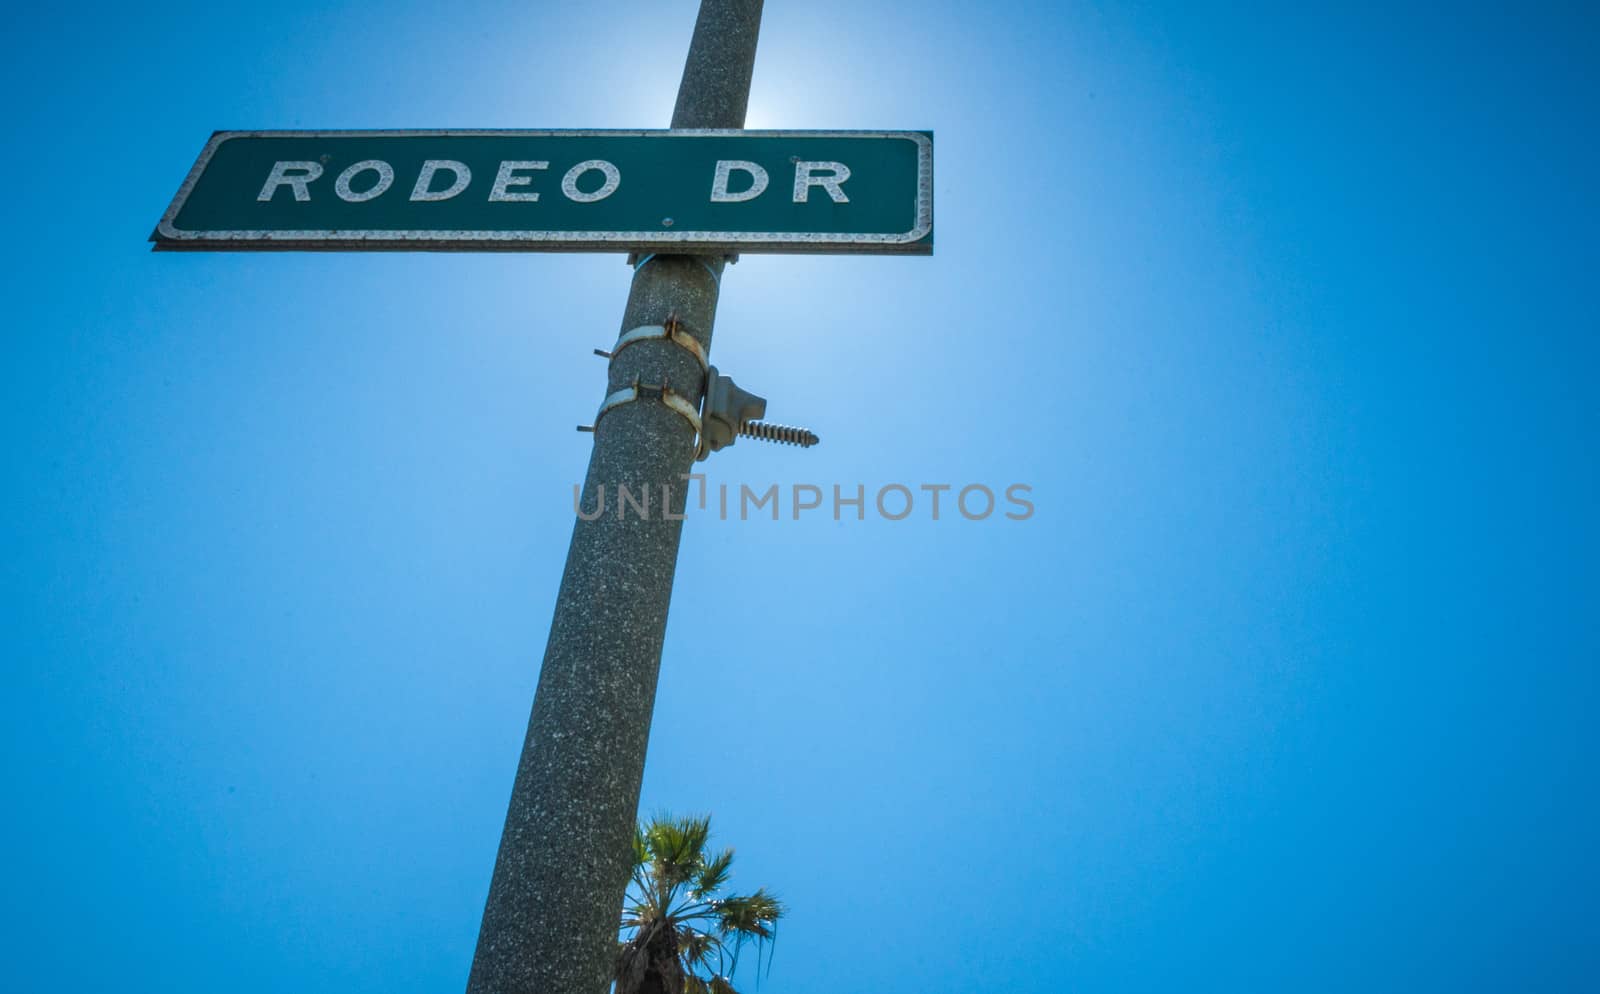 Rodeo Drive Strret sign in Beverly Hills sunlight 2013